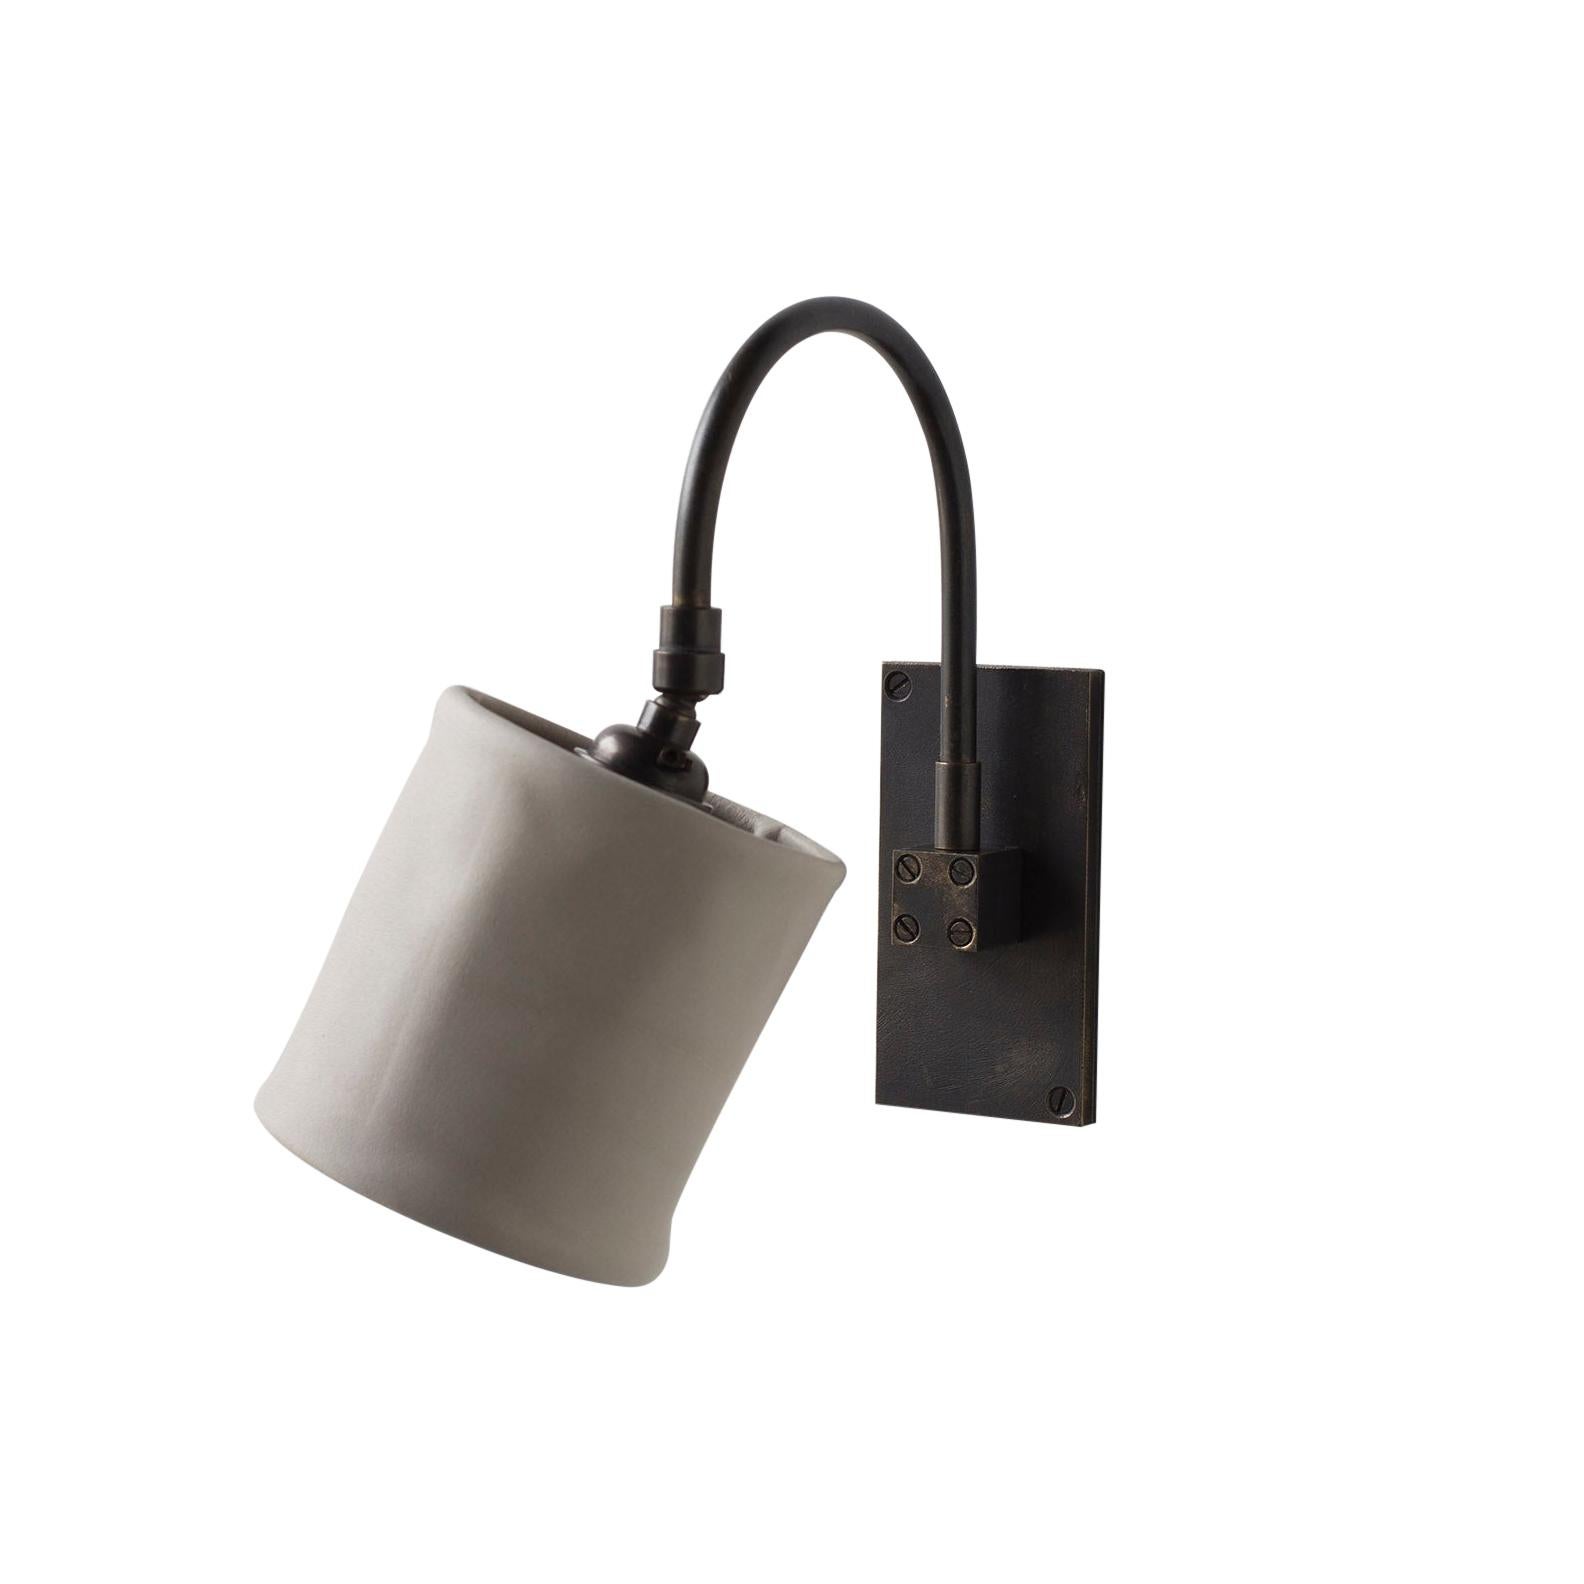 Series01 Small Sconce, Matte Blackened Brass, Ash Leather Shade, Pivoting shade